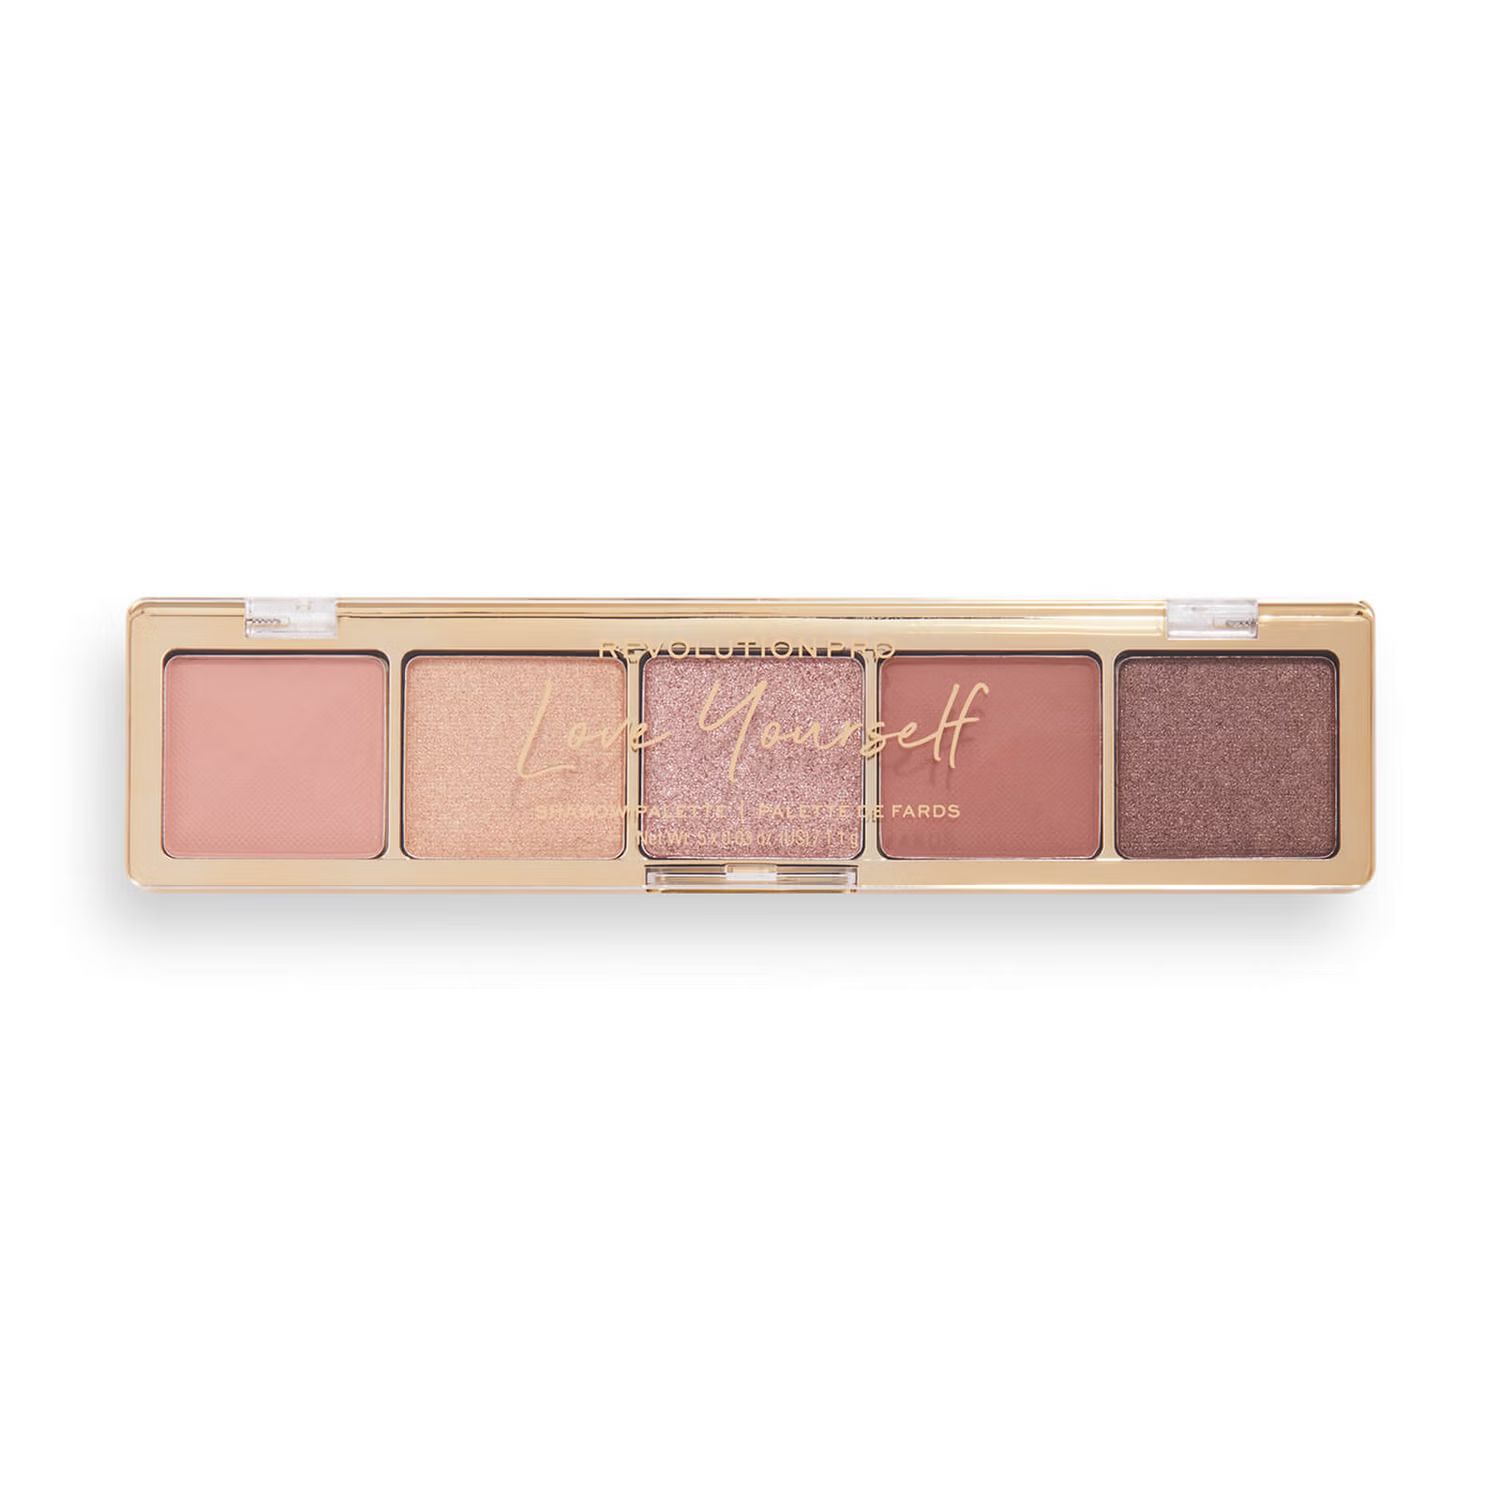 Revolution Pro Glam Palette - Love Yourself | Look Fantastic (ROW)